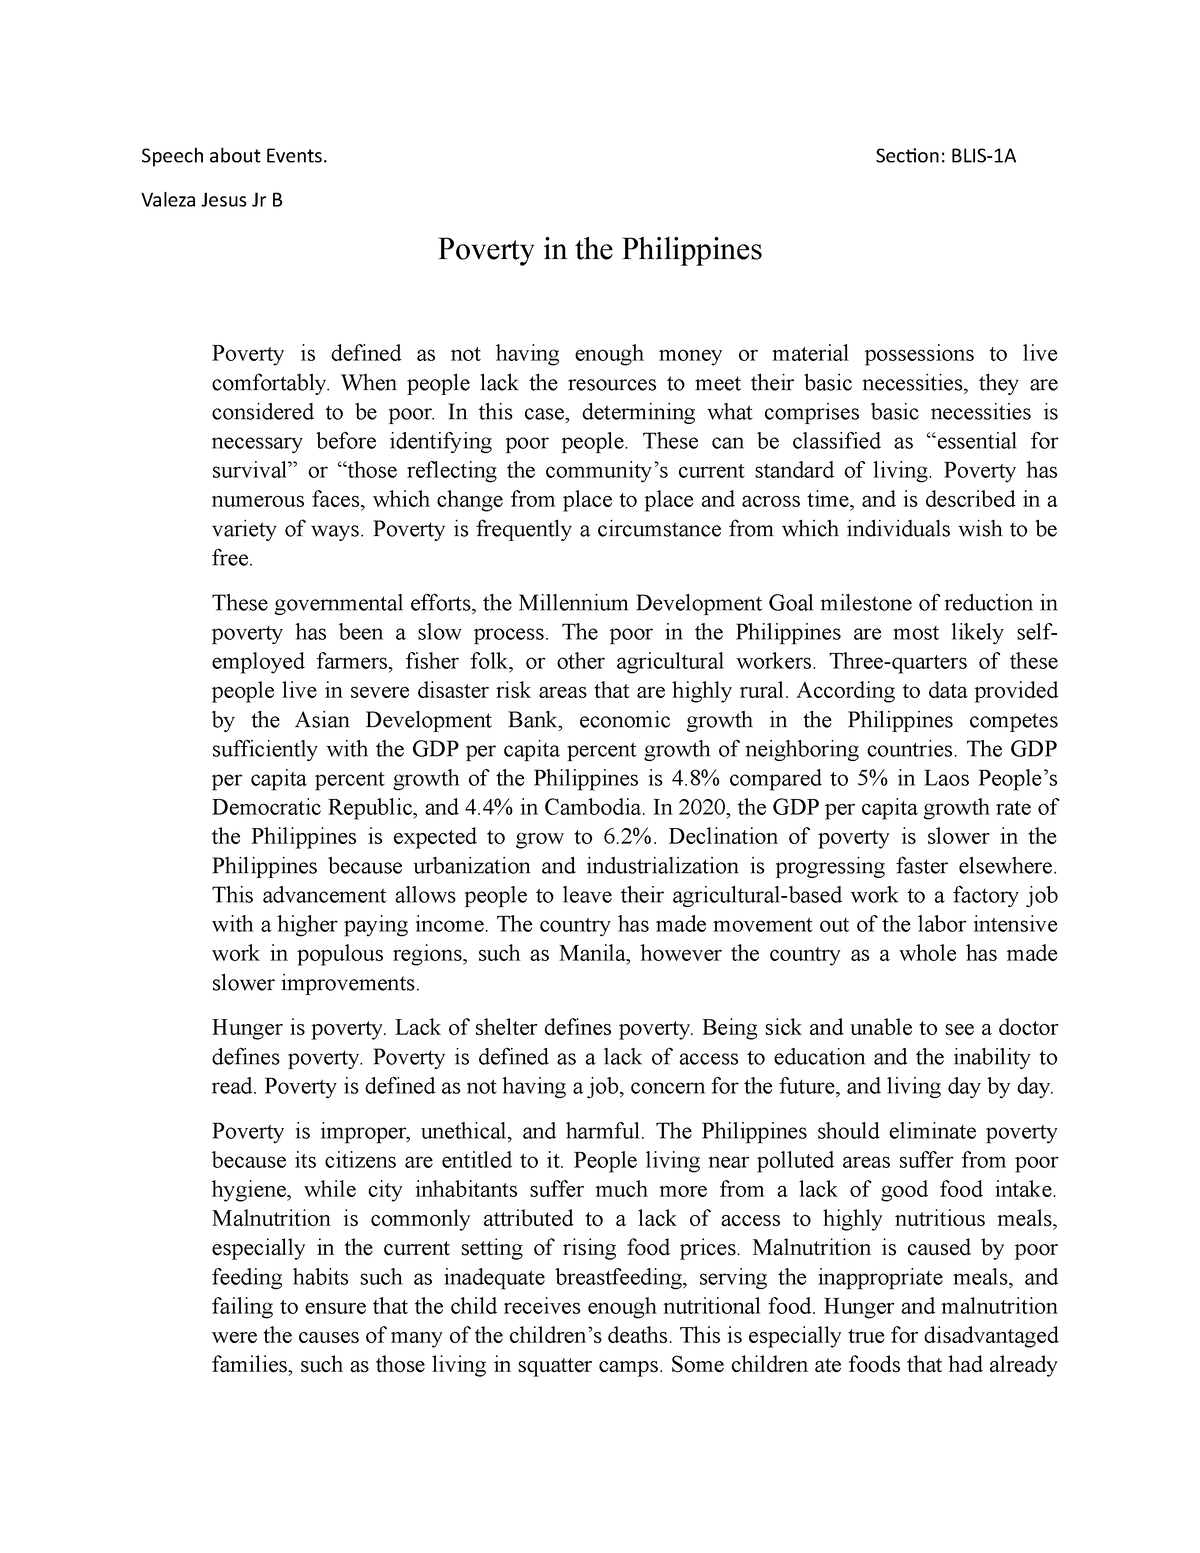 poverty in the philippines research paper introduction